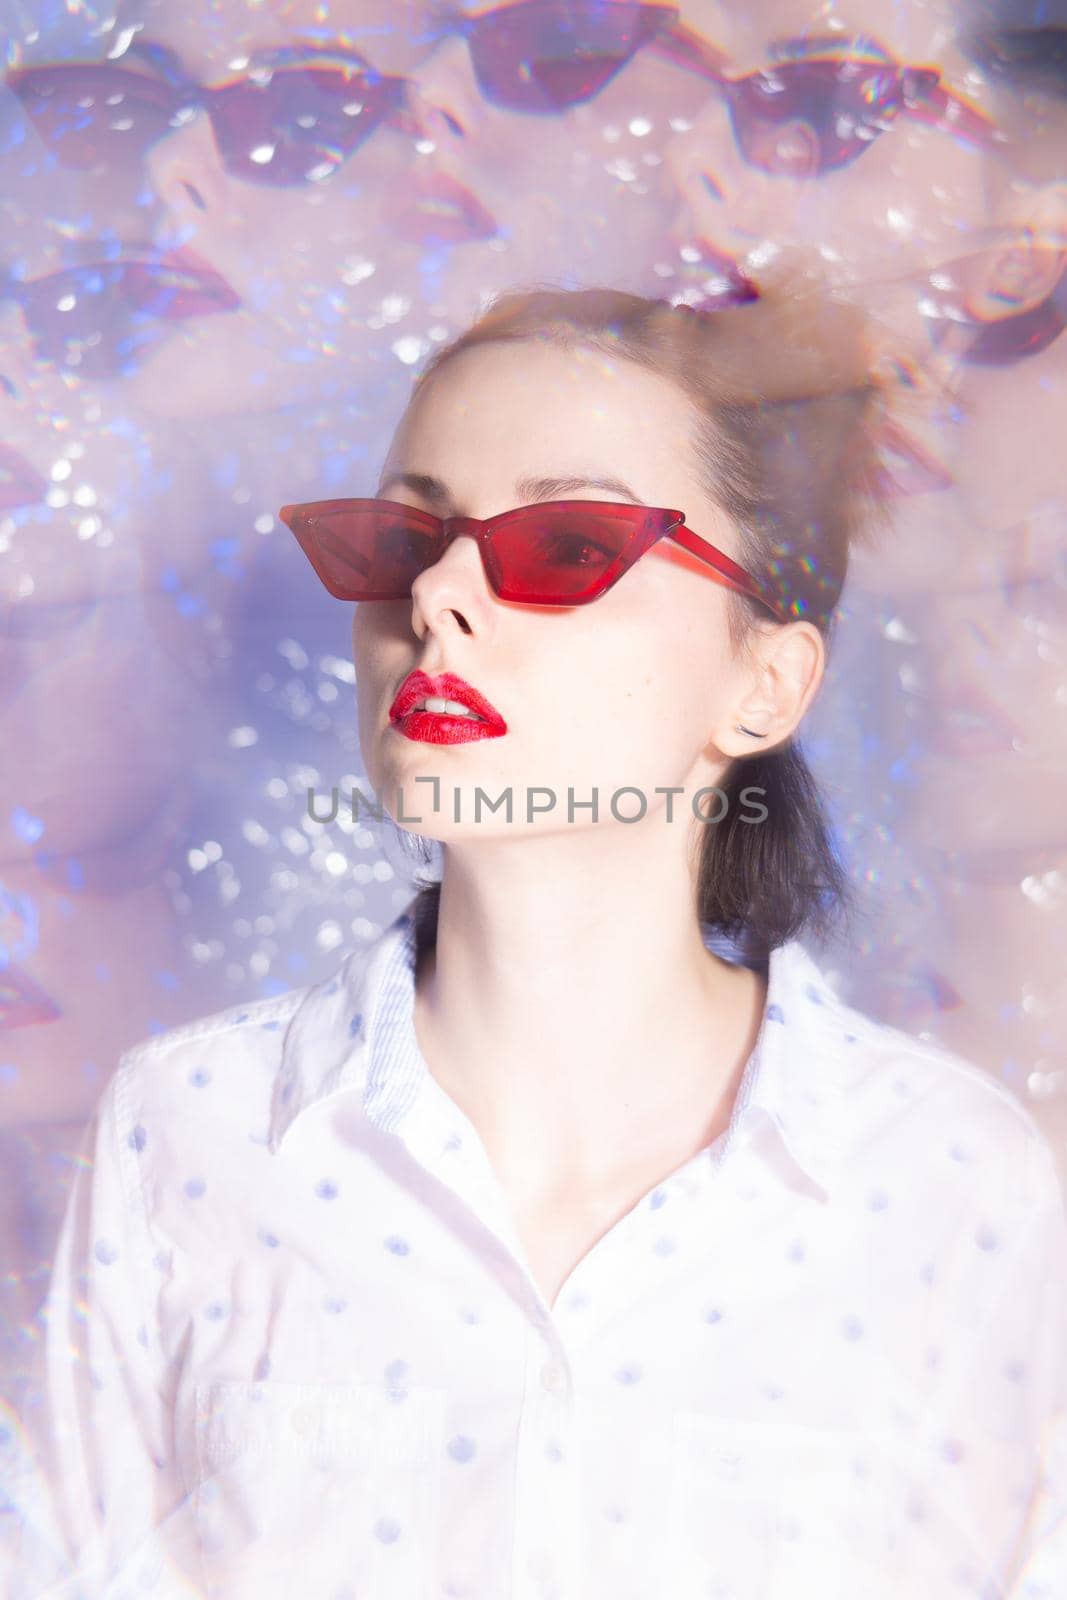 art portrait of a woman in glasses with red lipstick on her lips in a white shirt. High quality photo